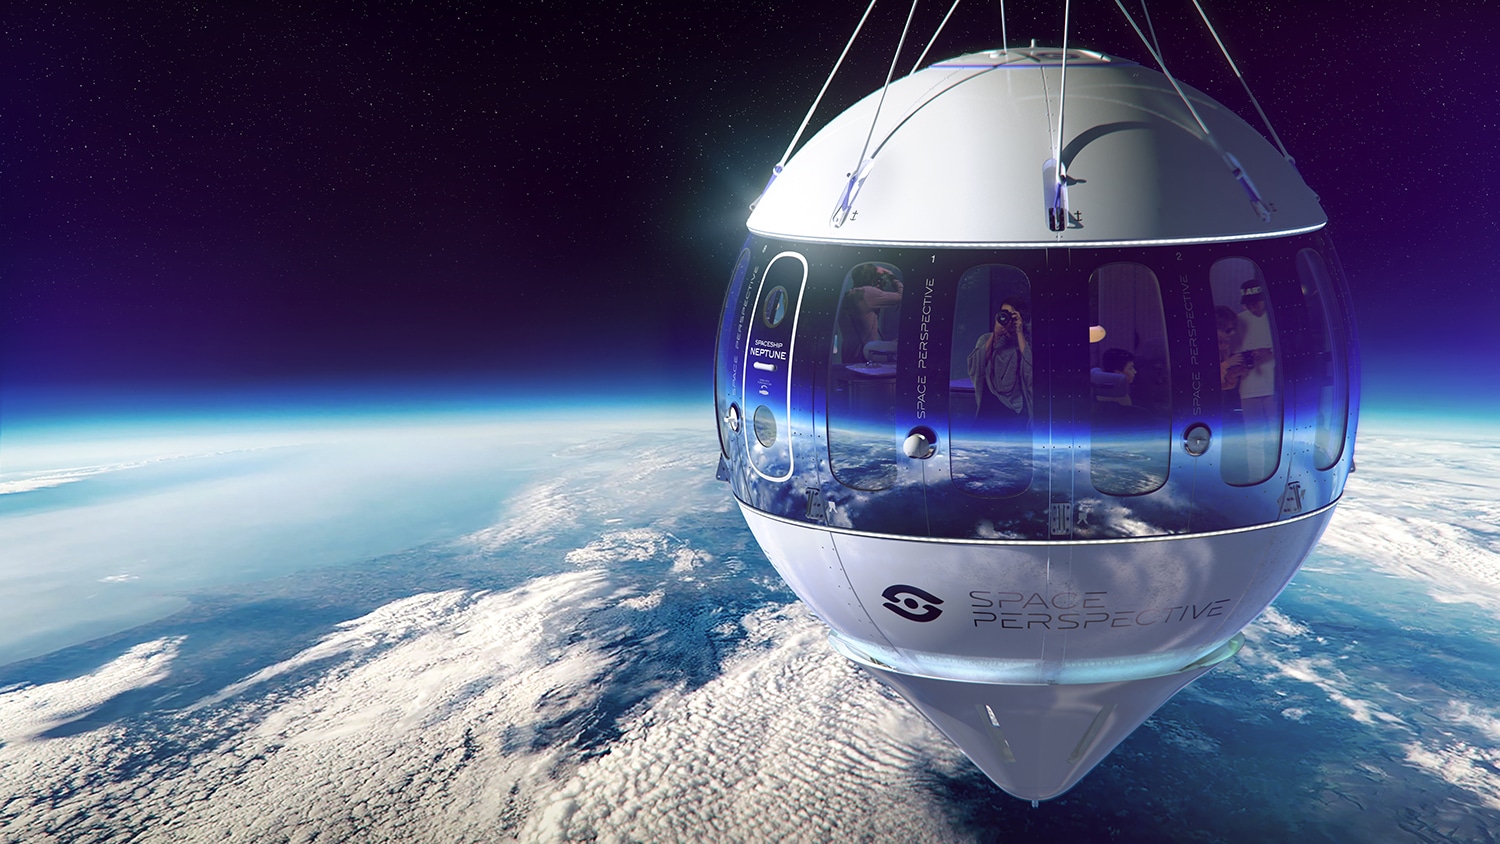 Space Perspective unveils final design of its luxury space tourism capsule